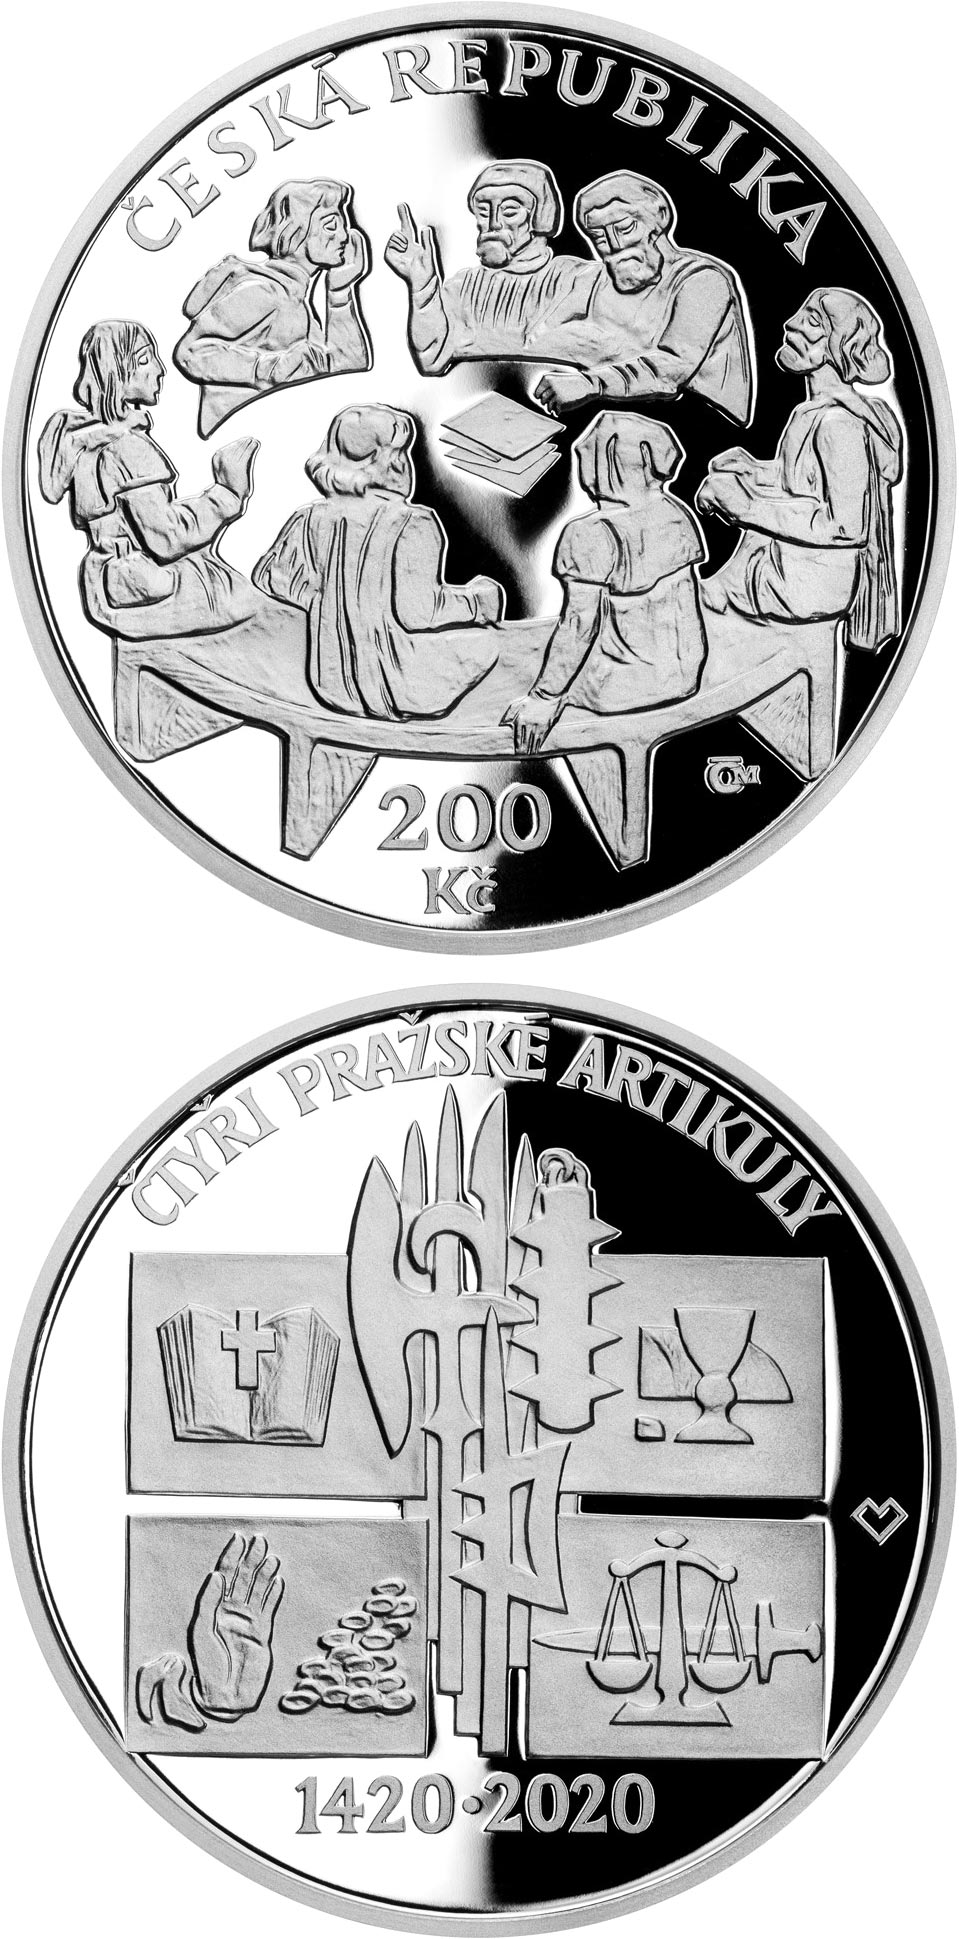 Image of 200 koruna coin - Promulgation of Four Articles of Prague | Czech Republic 2020.  The Silver coin is of Proof, BU quality.